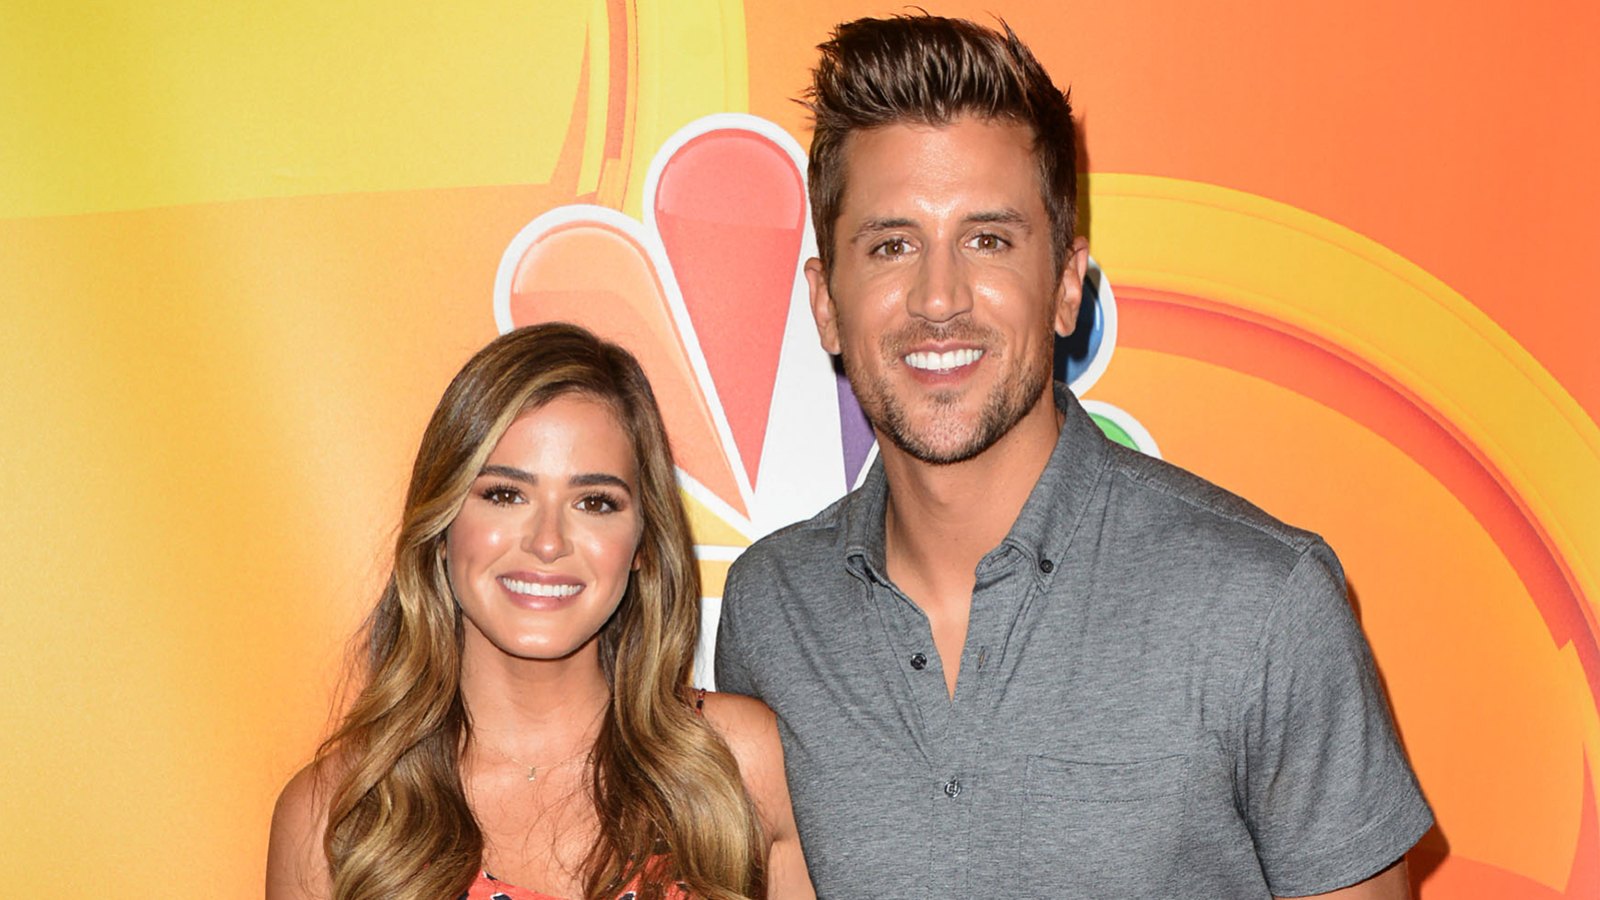 JoJo Fletcher and Her Husband Jordan Rodgers Meet Nephew Jack – And Joke They Are Ready for a Baby